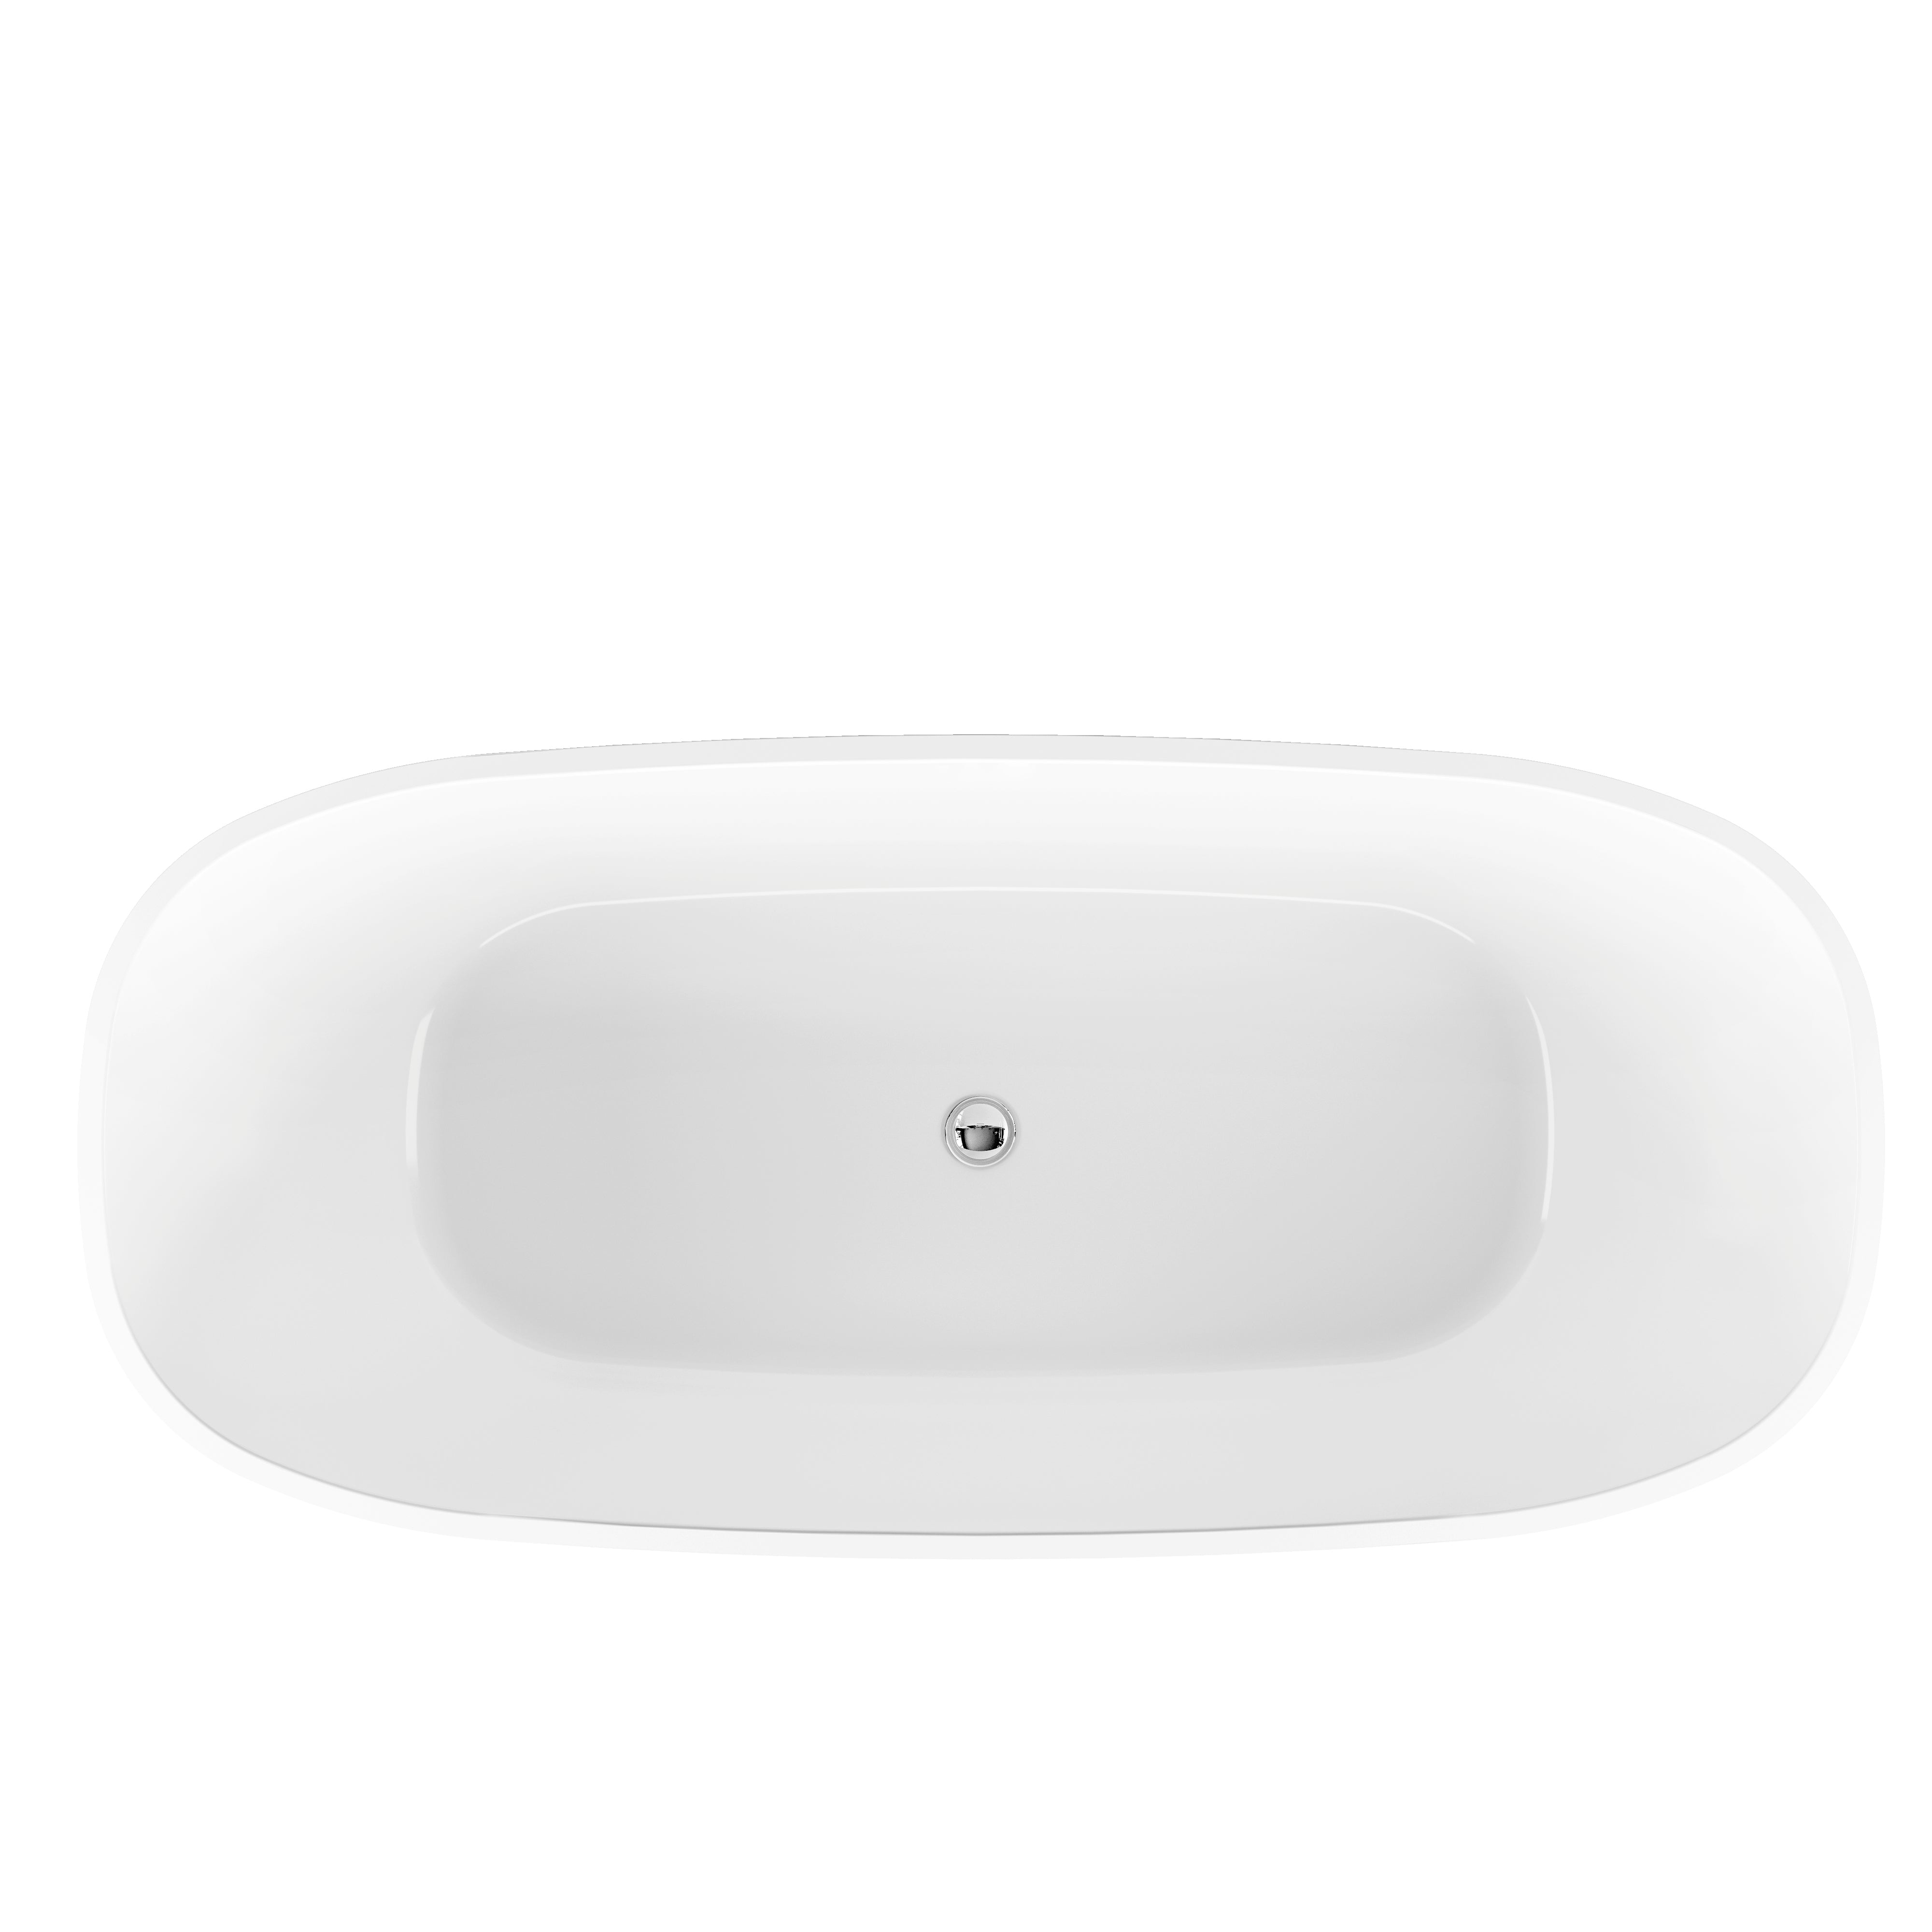 BEL BAGNO ALLY FREESTANDING BATHTUB SEMI GLOSS WHITE (AVAILABLE IN 1500MM AND 1700MM)